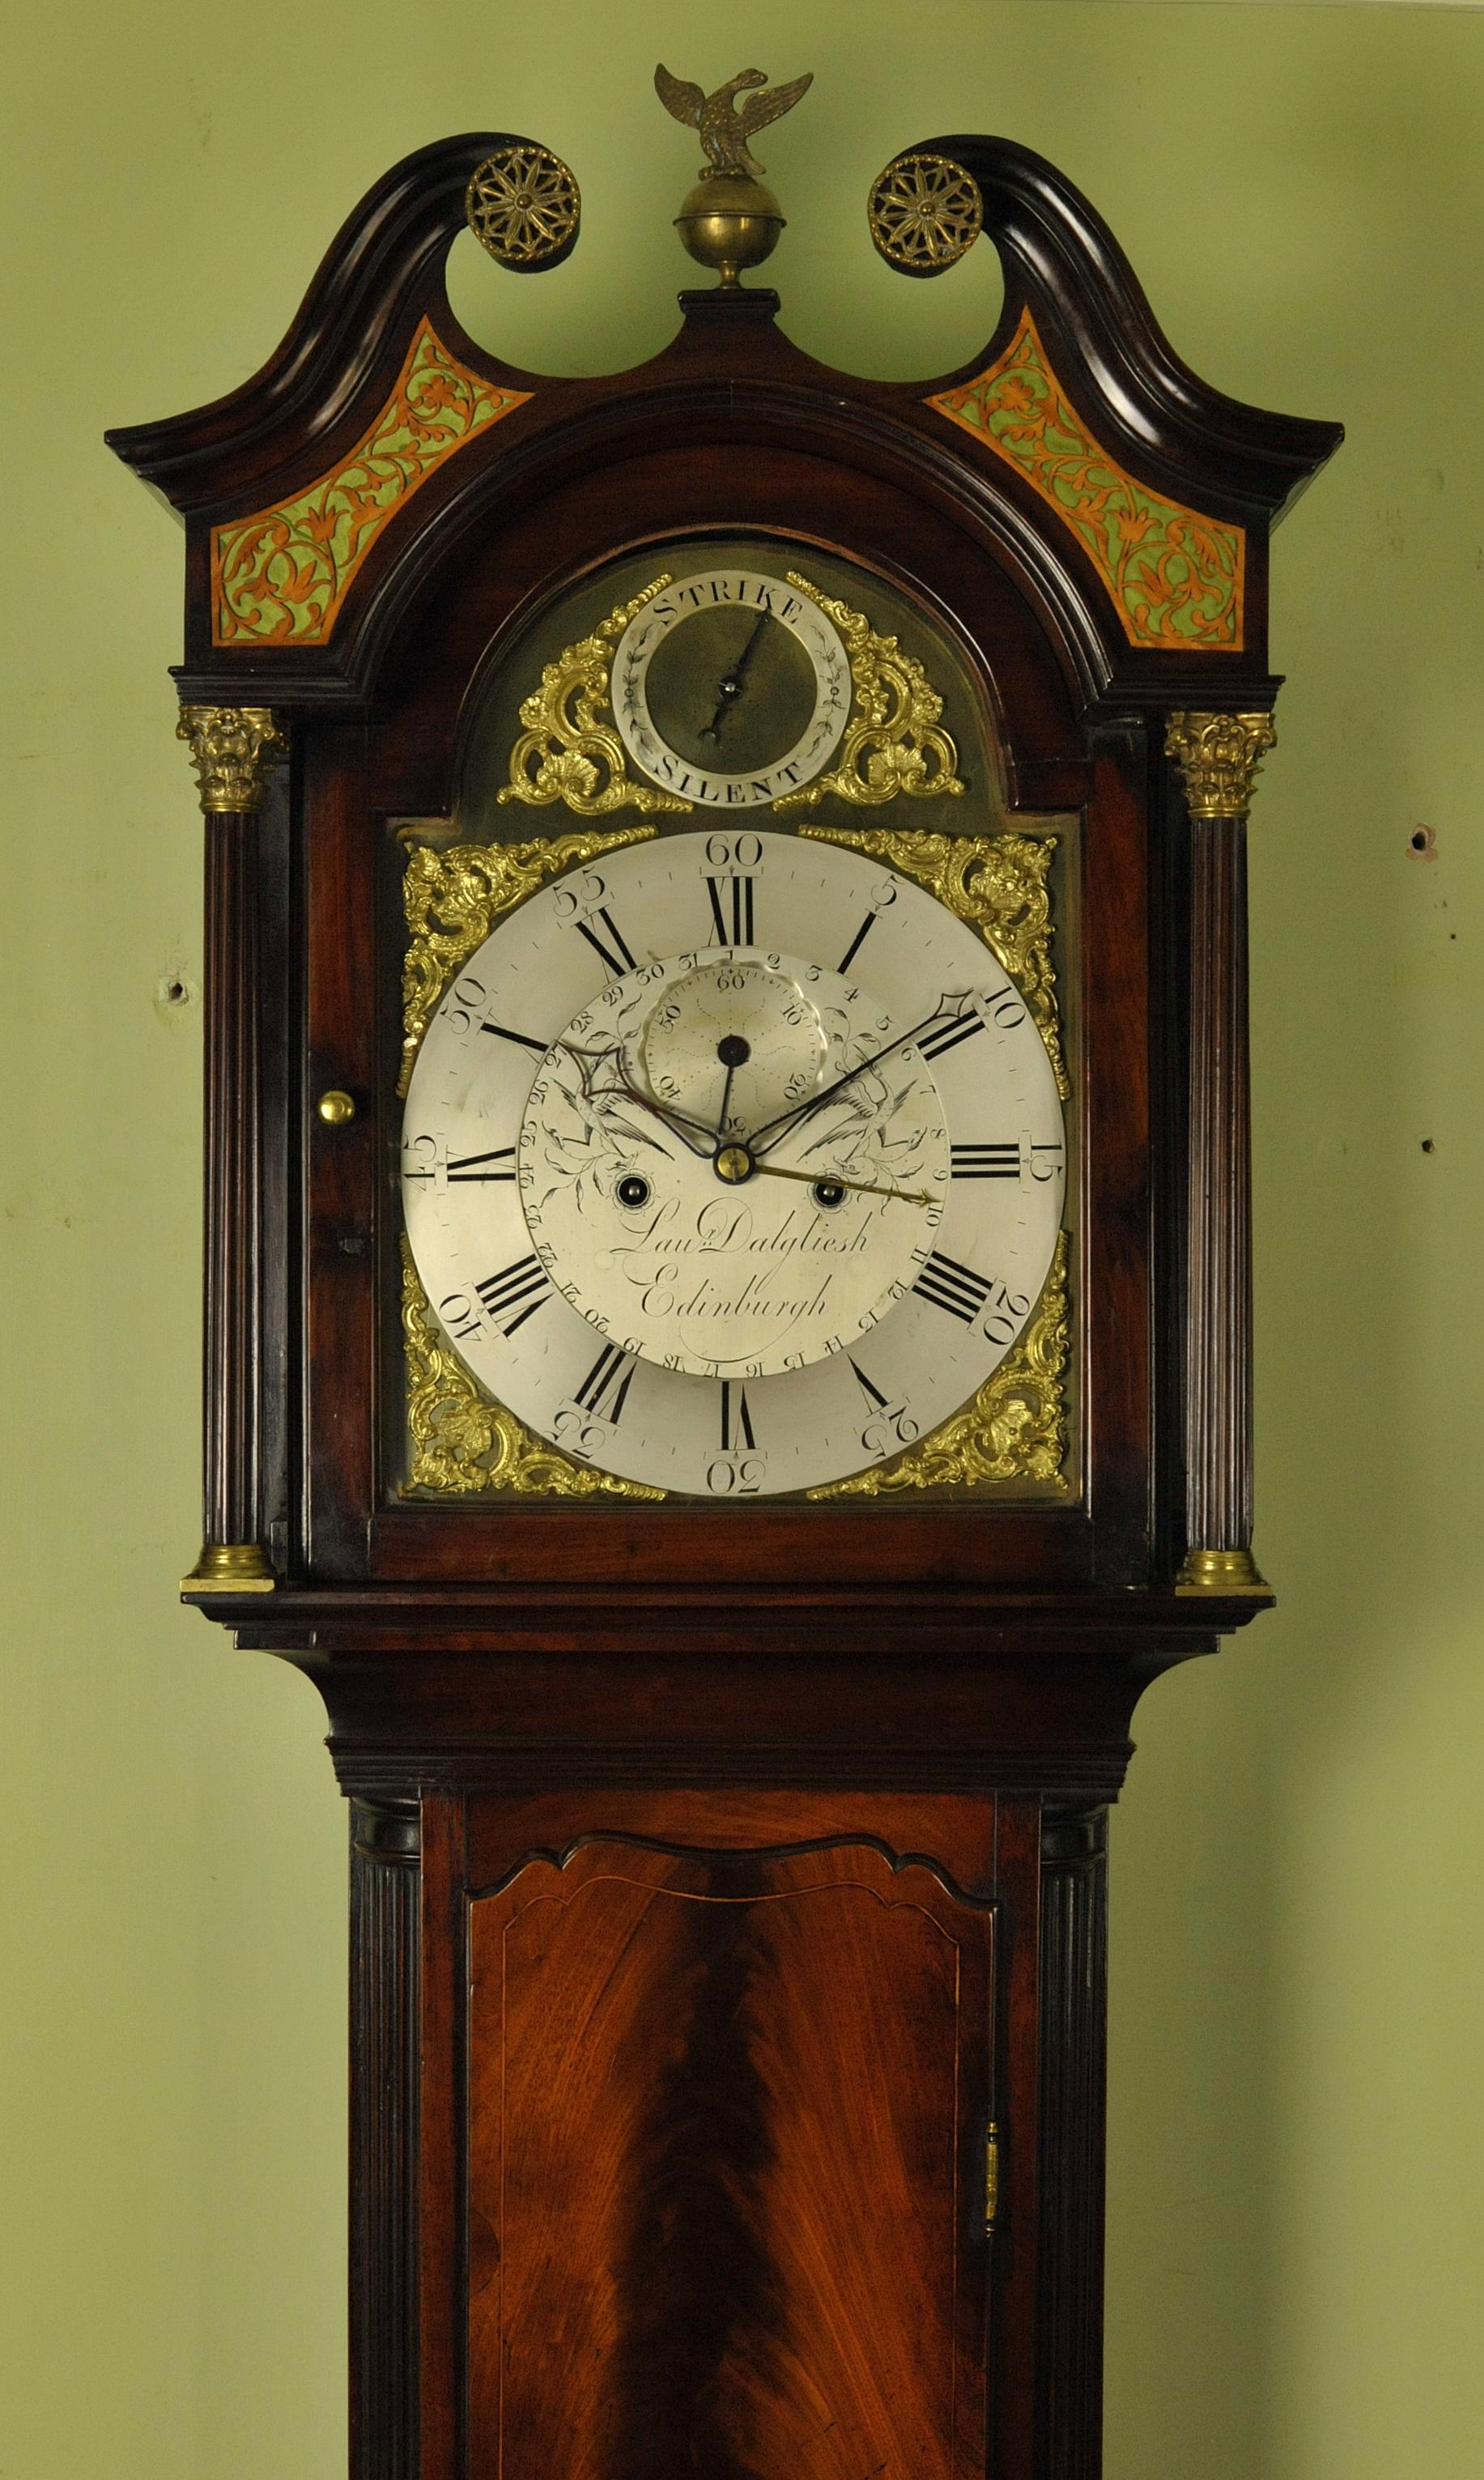 We are delighted to offer for sale this superb Georgian mahogany longcase clock by Laurence Dalgliesh of Ebinburgh who was working from 1771 to 1808 having been apprenticed to his father John . This clock would date circa 1780
The mahogany case is